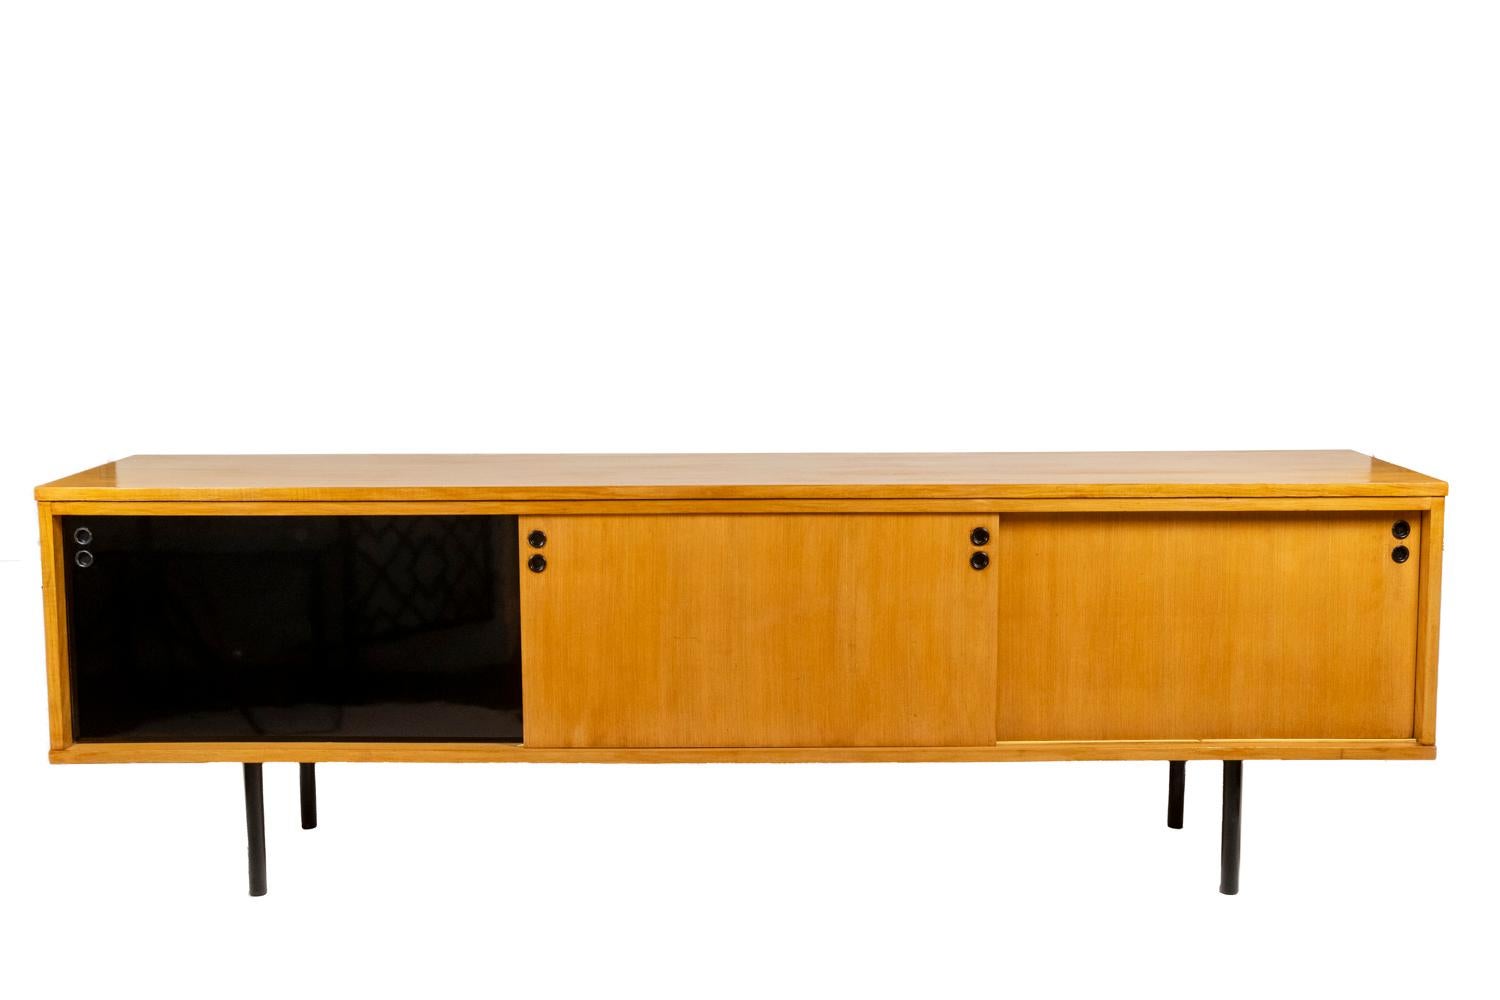 Joseph-André Motte, signed.

Sideboard in blond ash, opening on the front with three side doors, rectangular in shape with a central shelf in each part, resting on a black lacquered metal base. Round shaped handles.

French work realized in the